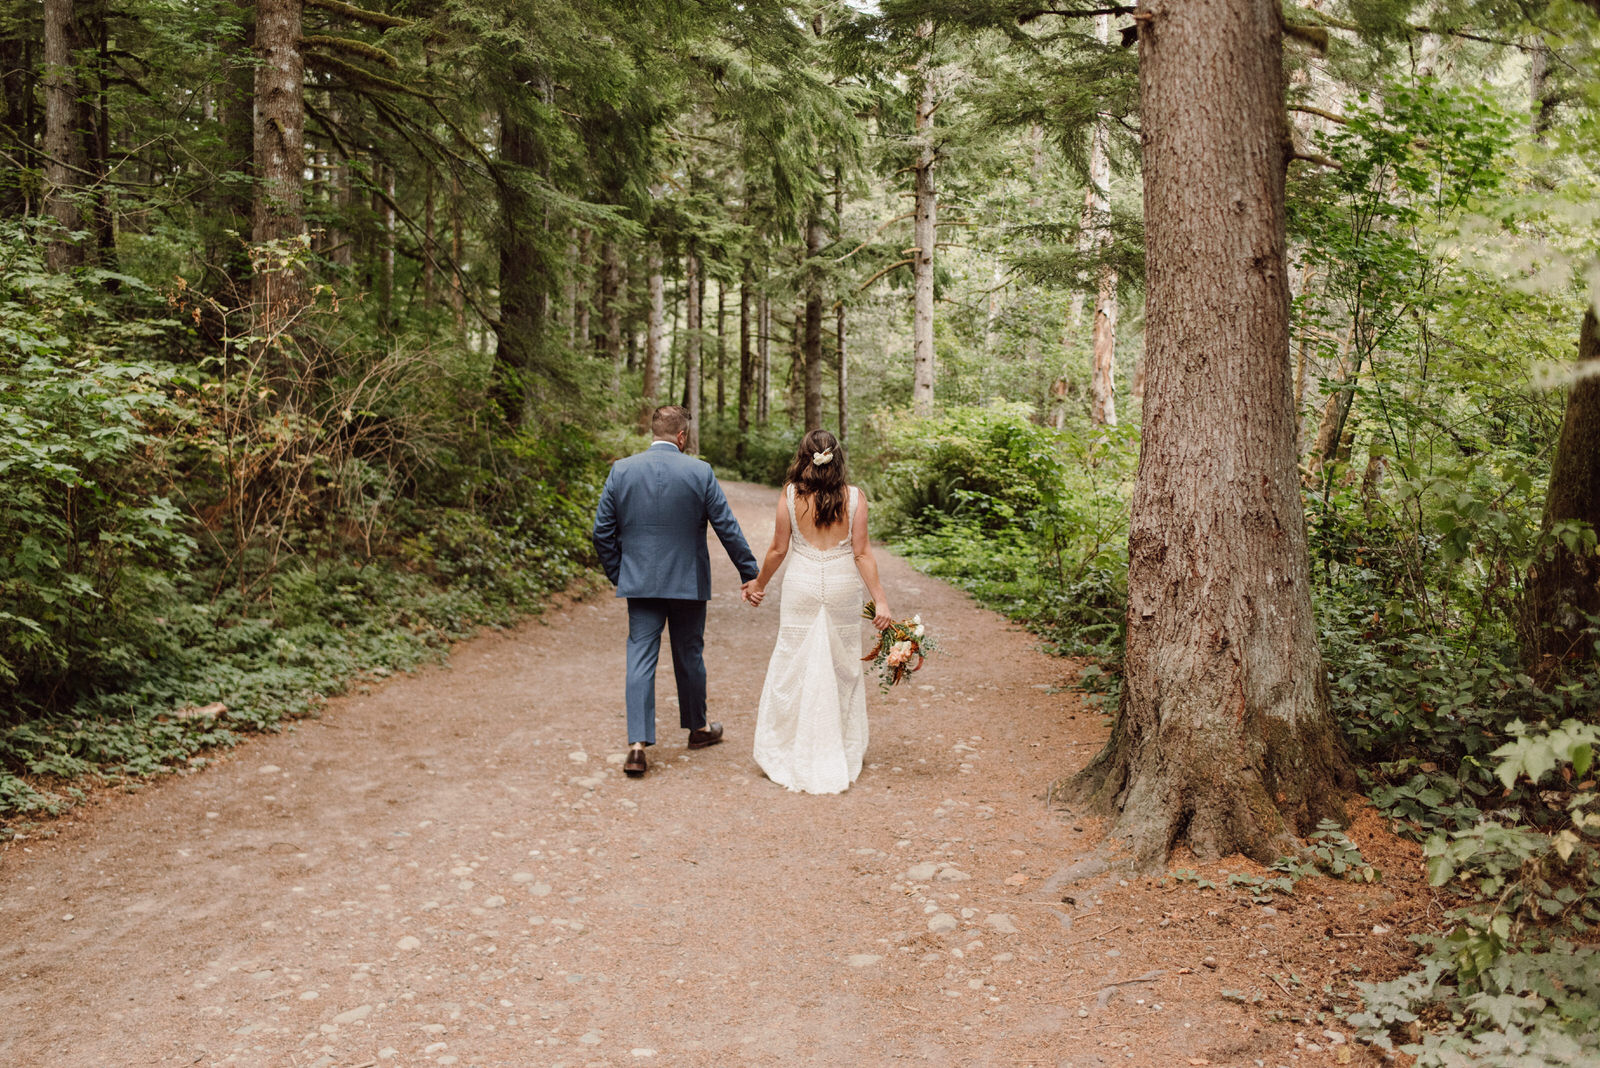 Micro wedding and elopement timelines. Two marriers walk away from the camera down a forest path, surrounded by trees. They are holding hands, and one is holding a bouquet.